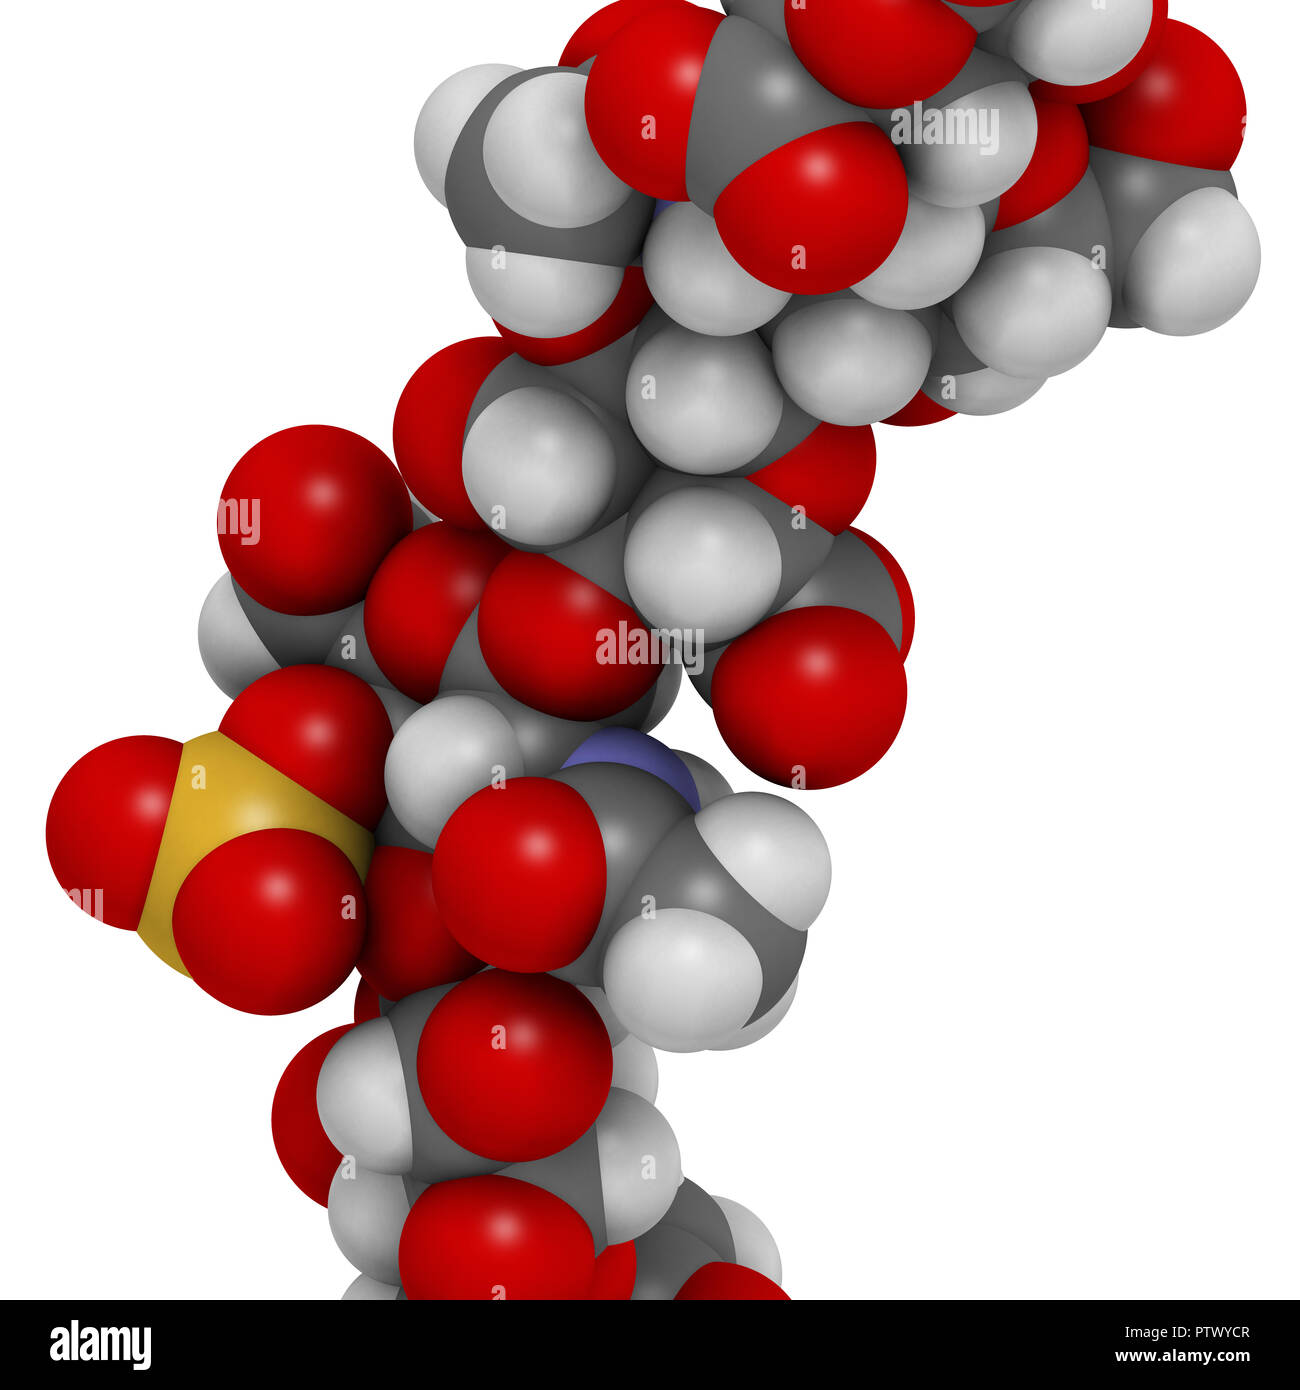 Chondroitin sulphate (short fragment). Important component of cartilage. Used as dietary supplement in treatment of osteoarthritis. 3D rendering. Atom Stock Photo